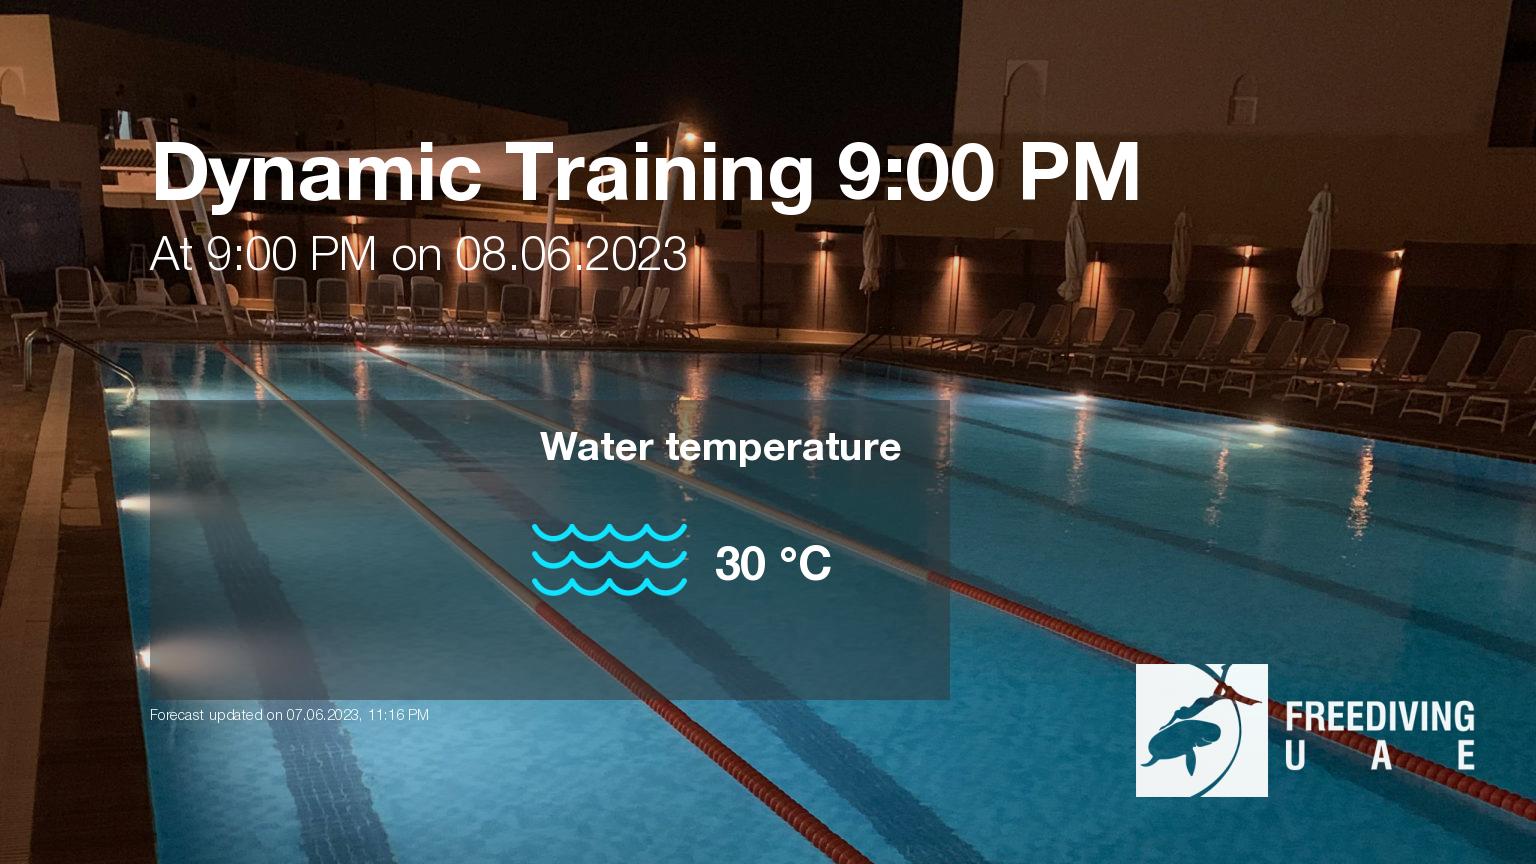 Expected weather during Dynamic Training 9:00 PM on Thu, Jun 8, at 9:00 PM